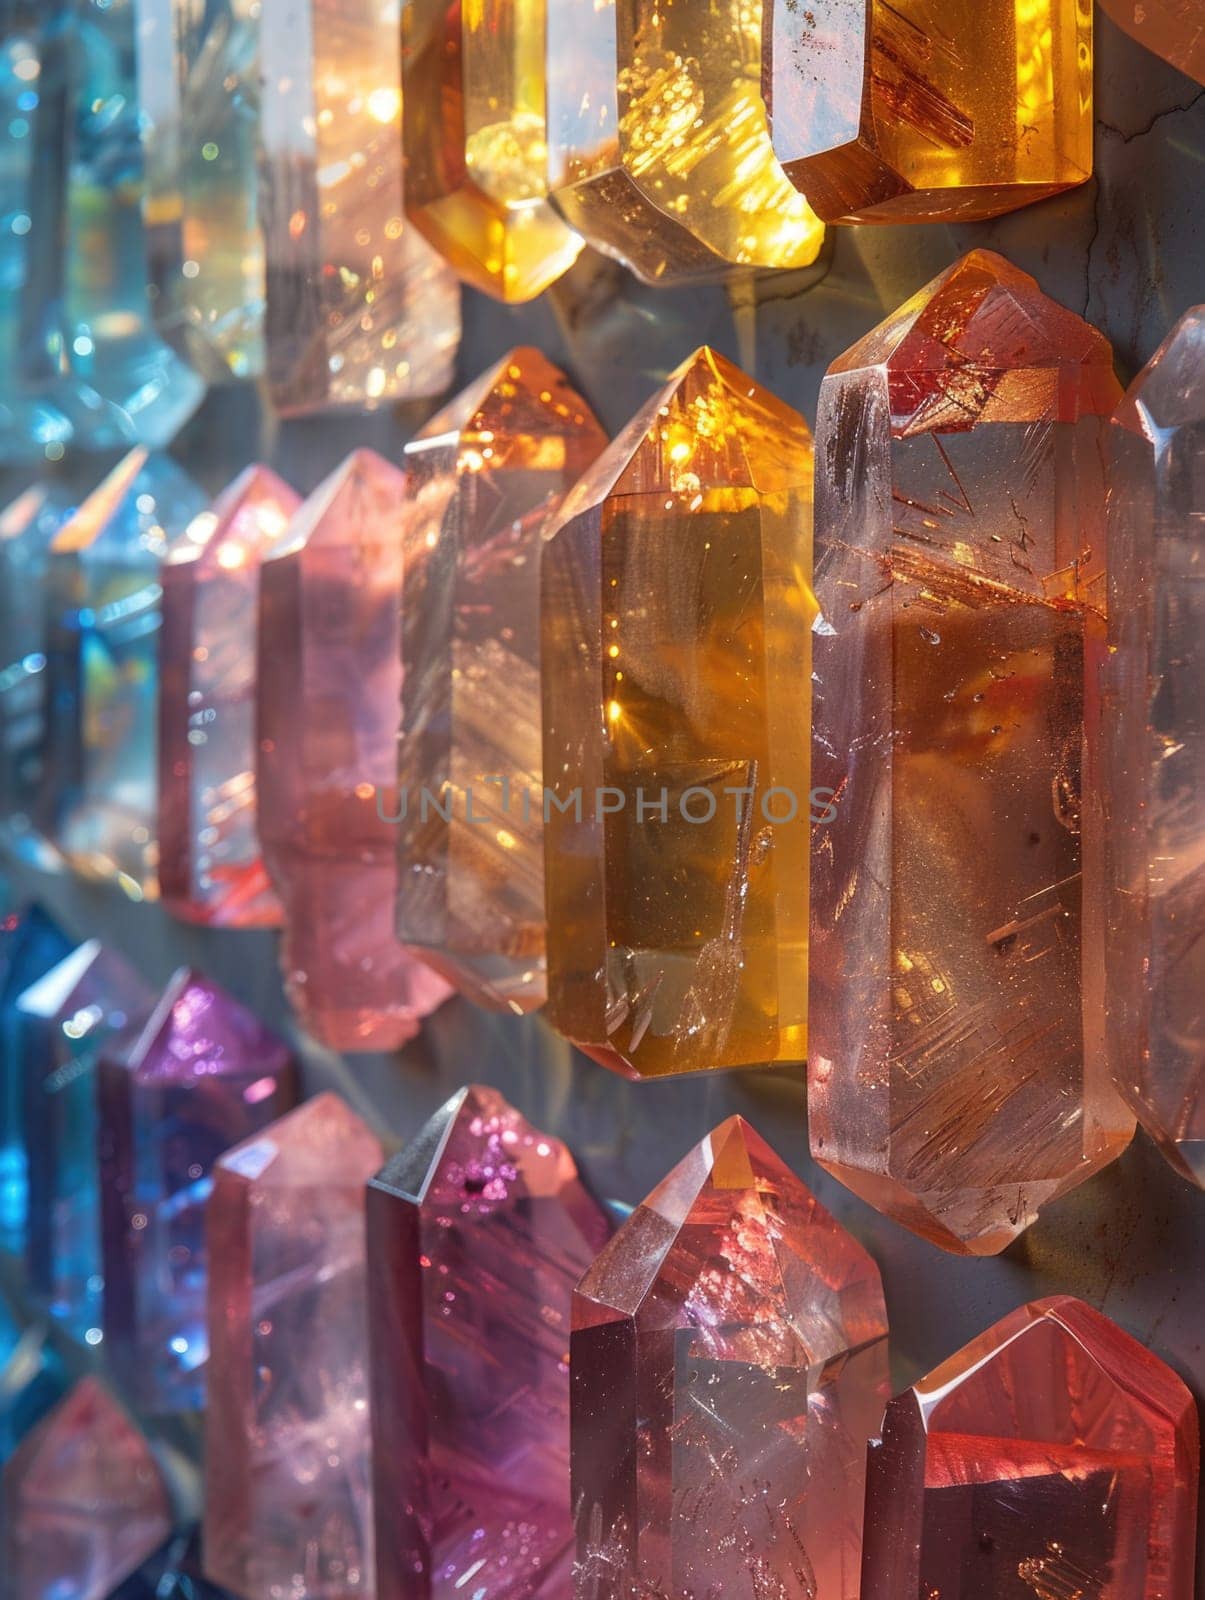 Various colored crystals hanging in an array on a wall, creating a vibrant and eye-catching display.